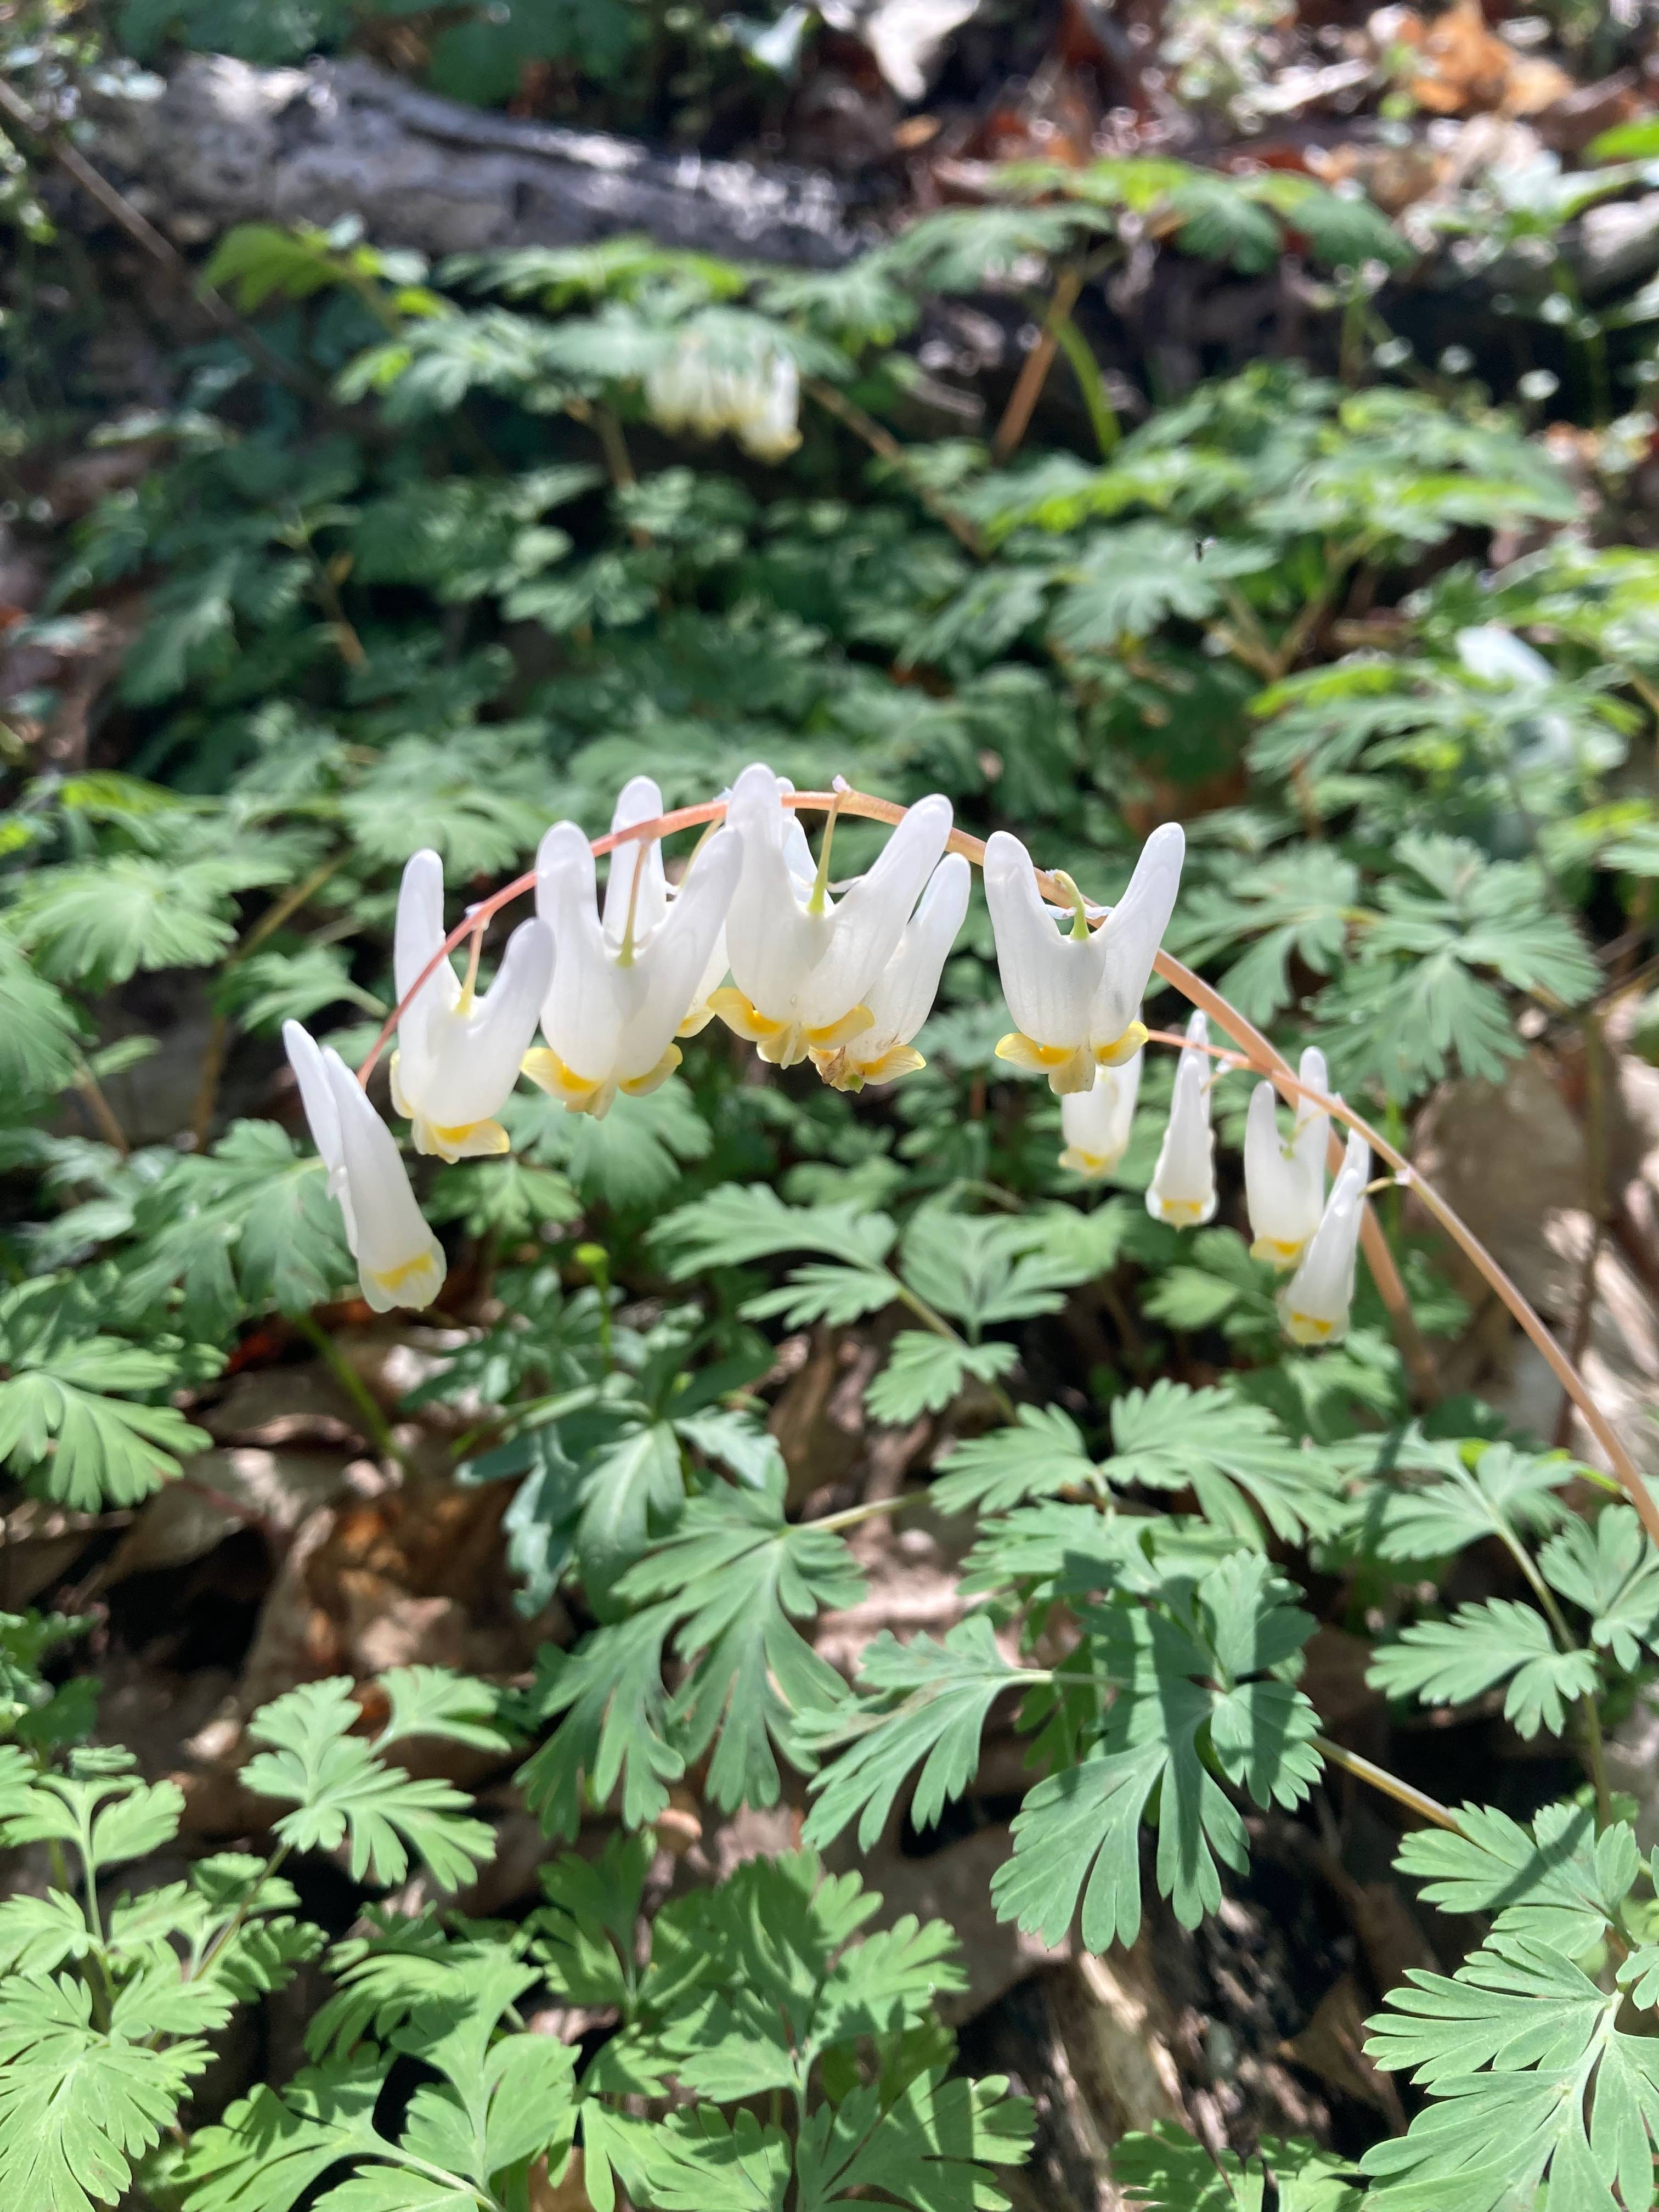 The Scientific Name is Dicentra cucullaria. You will likely hear them called Dutchman's Breeches, Dutchman's Britches. This picture shows the The raceme of white flowers are very distinctive, looking like pairs of pants on a clothesline. The racemes tend to bend to one side, with the flowers hanging upside-down from their pedicels. of Dicentra cucullaria